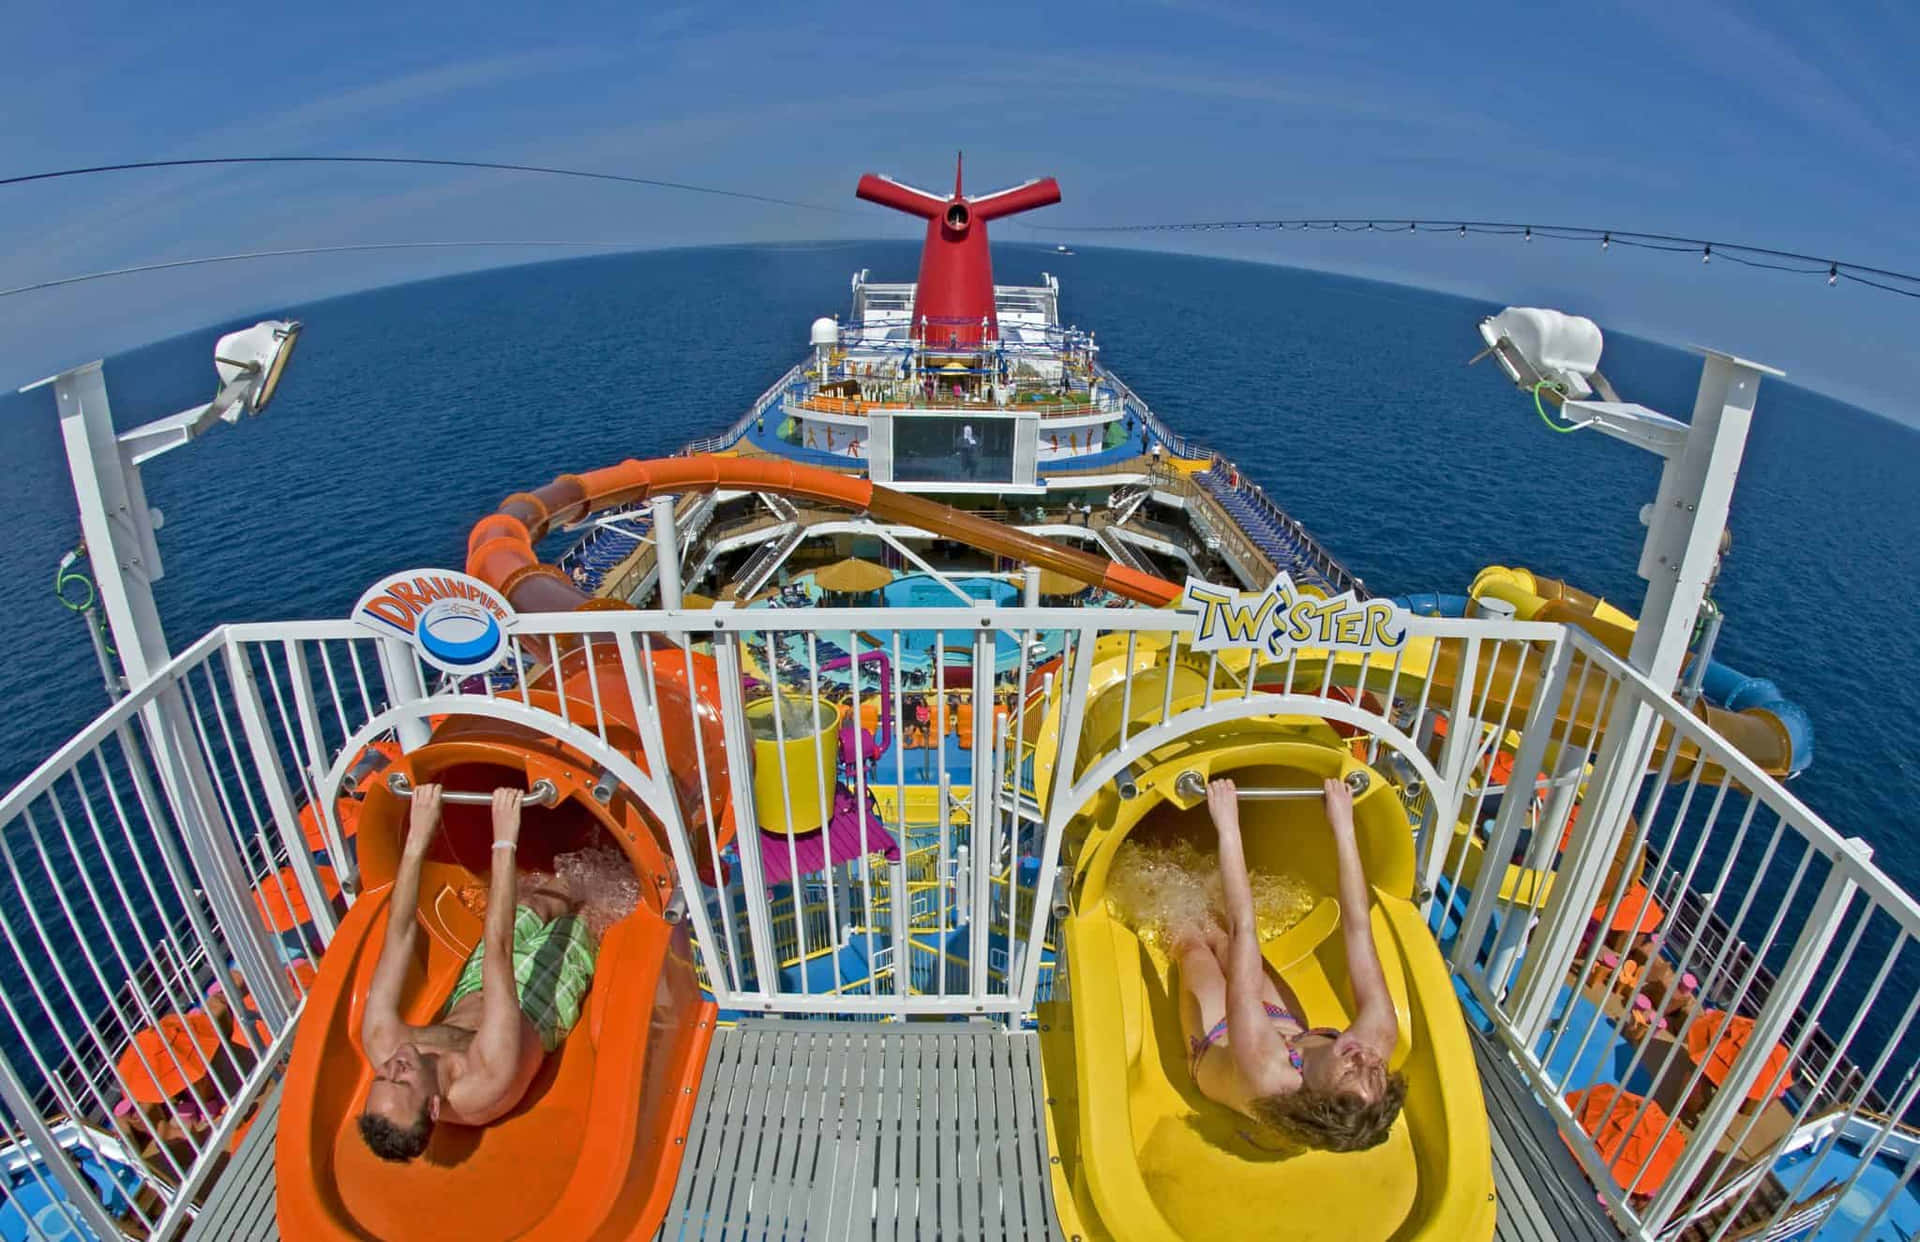 Carnival Magic - A View From The Top Of The Ship